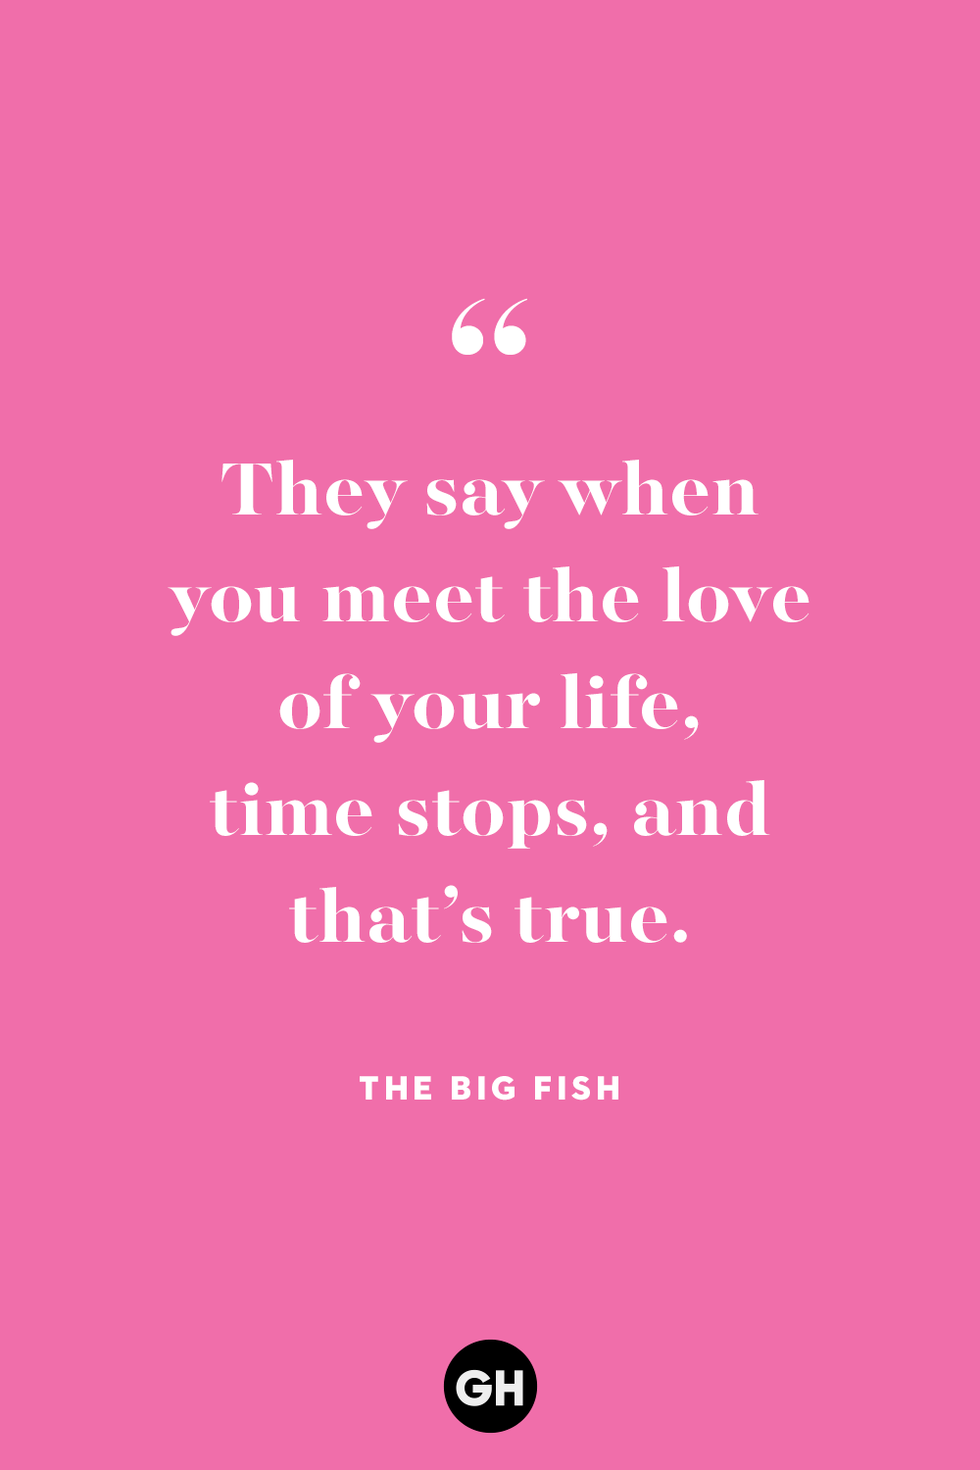 35 Hopeless Romantic Love Quotes That Will Make You Feel The Love., Heartfelt Love And Lif…